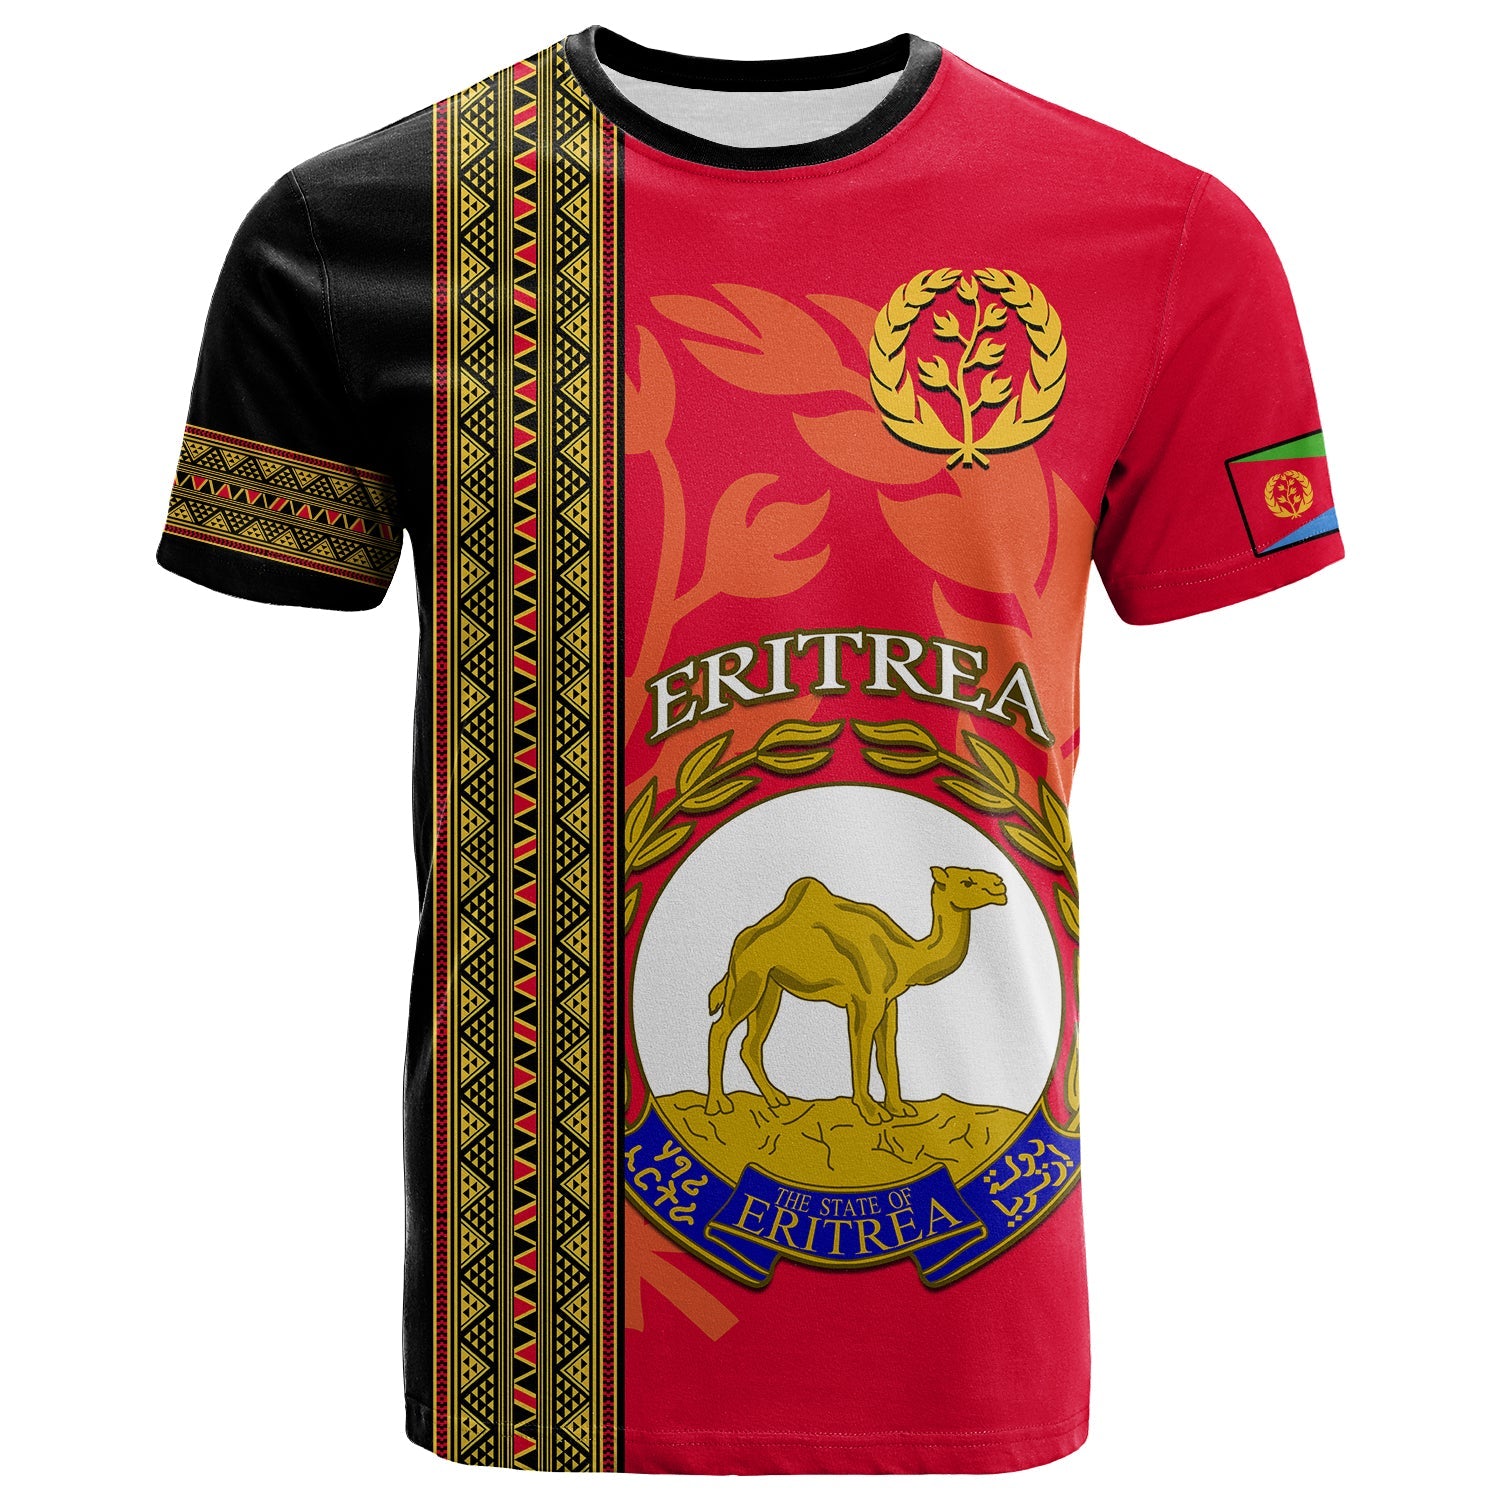 eritrea-t-shirt-african-pattern-happy-independence-day-version-black